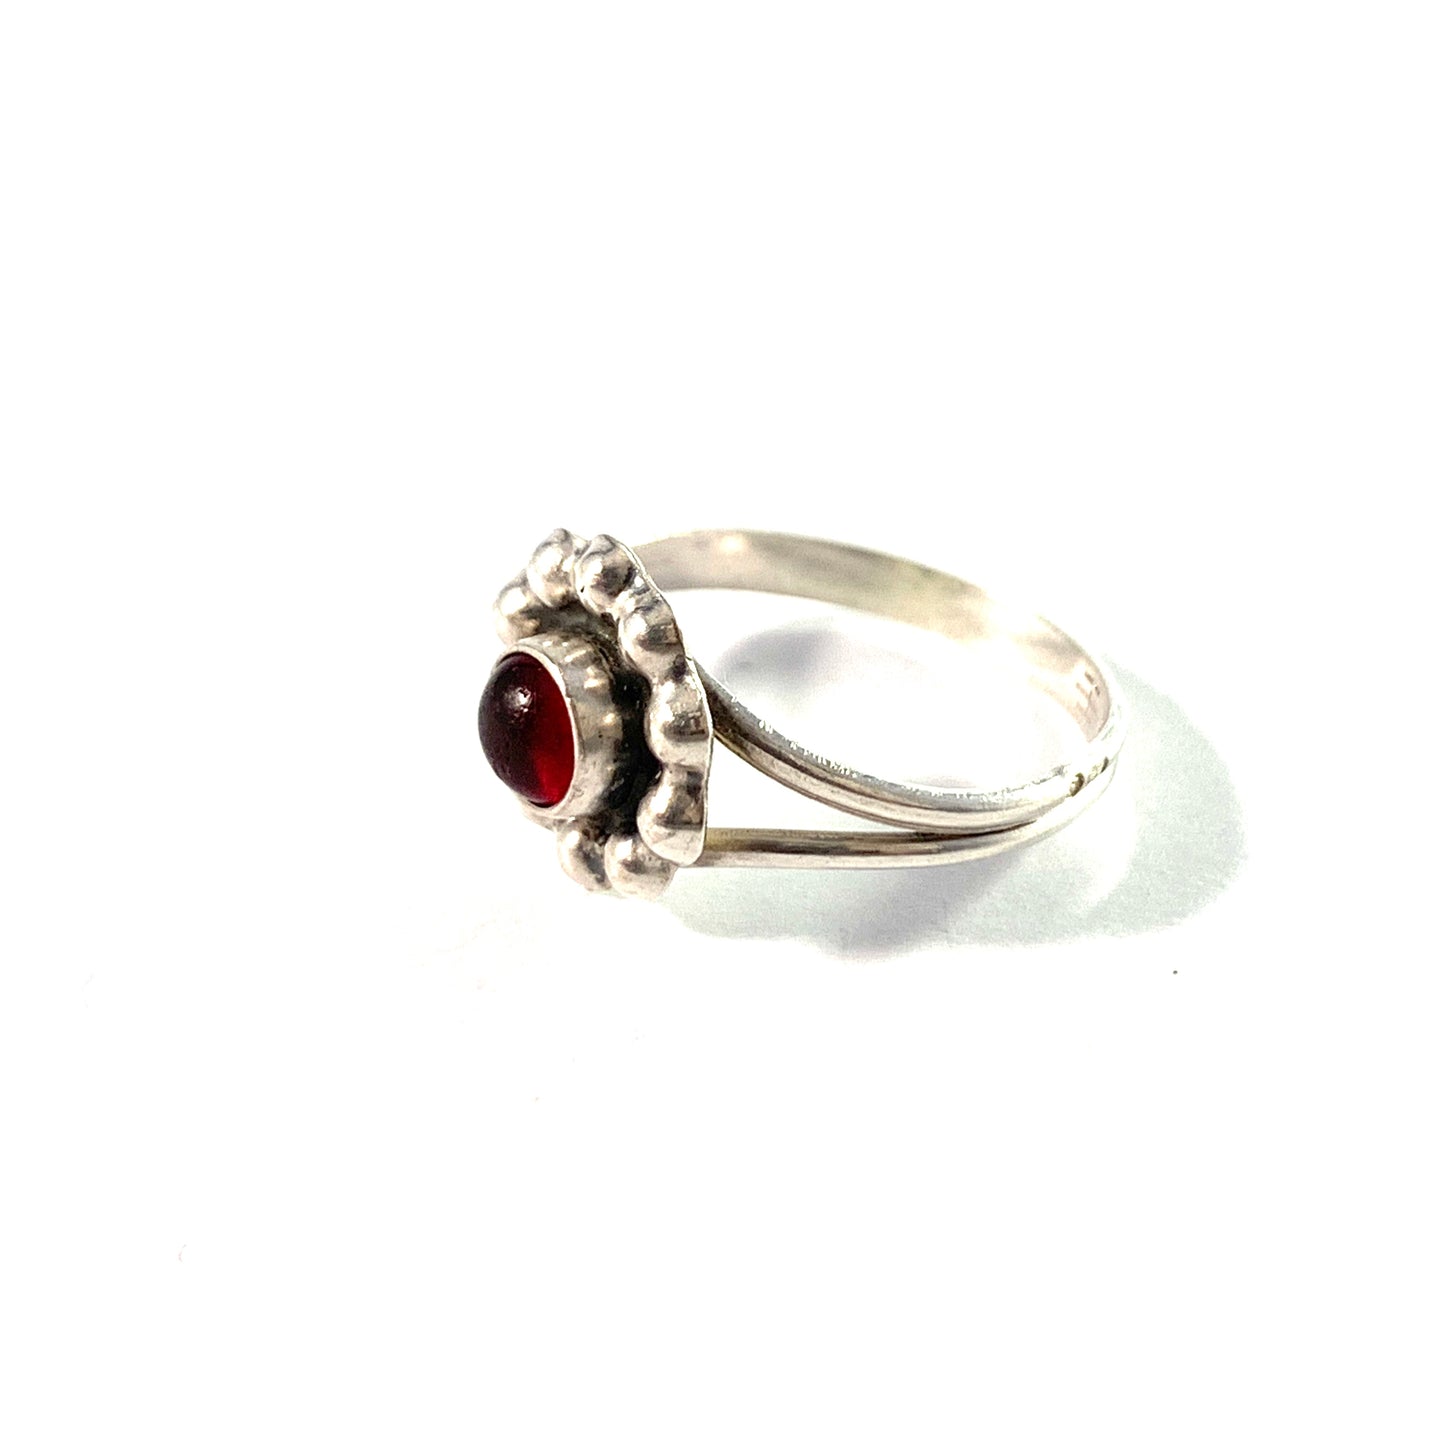 Danmark Antique early 1900. Solid Silver Red Paste Ring. Makers' Mark.